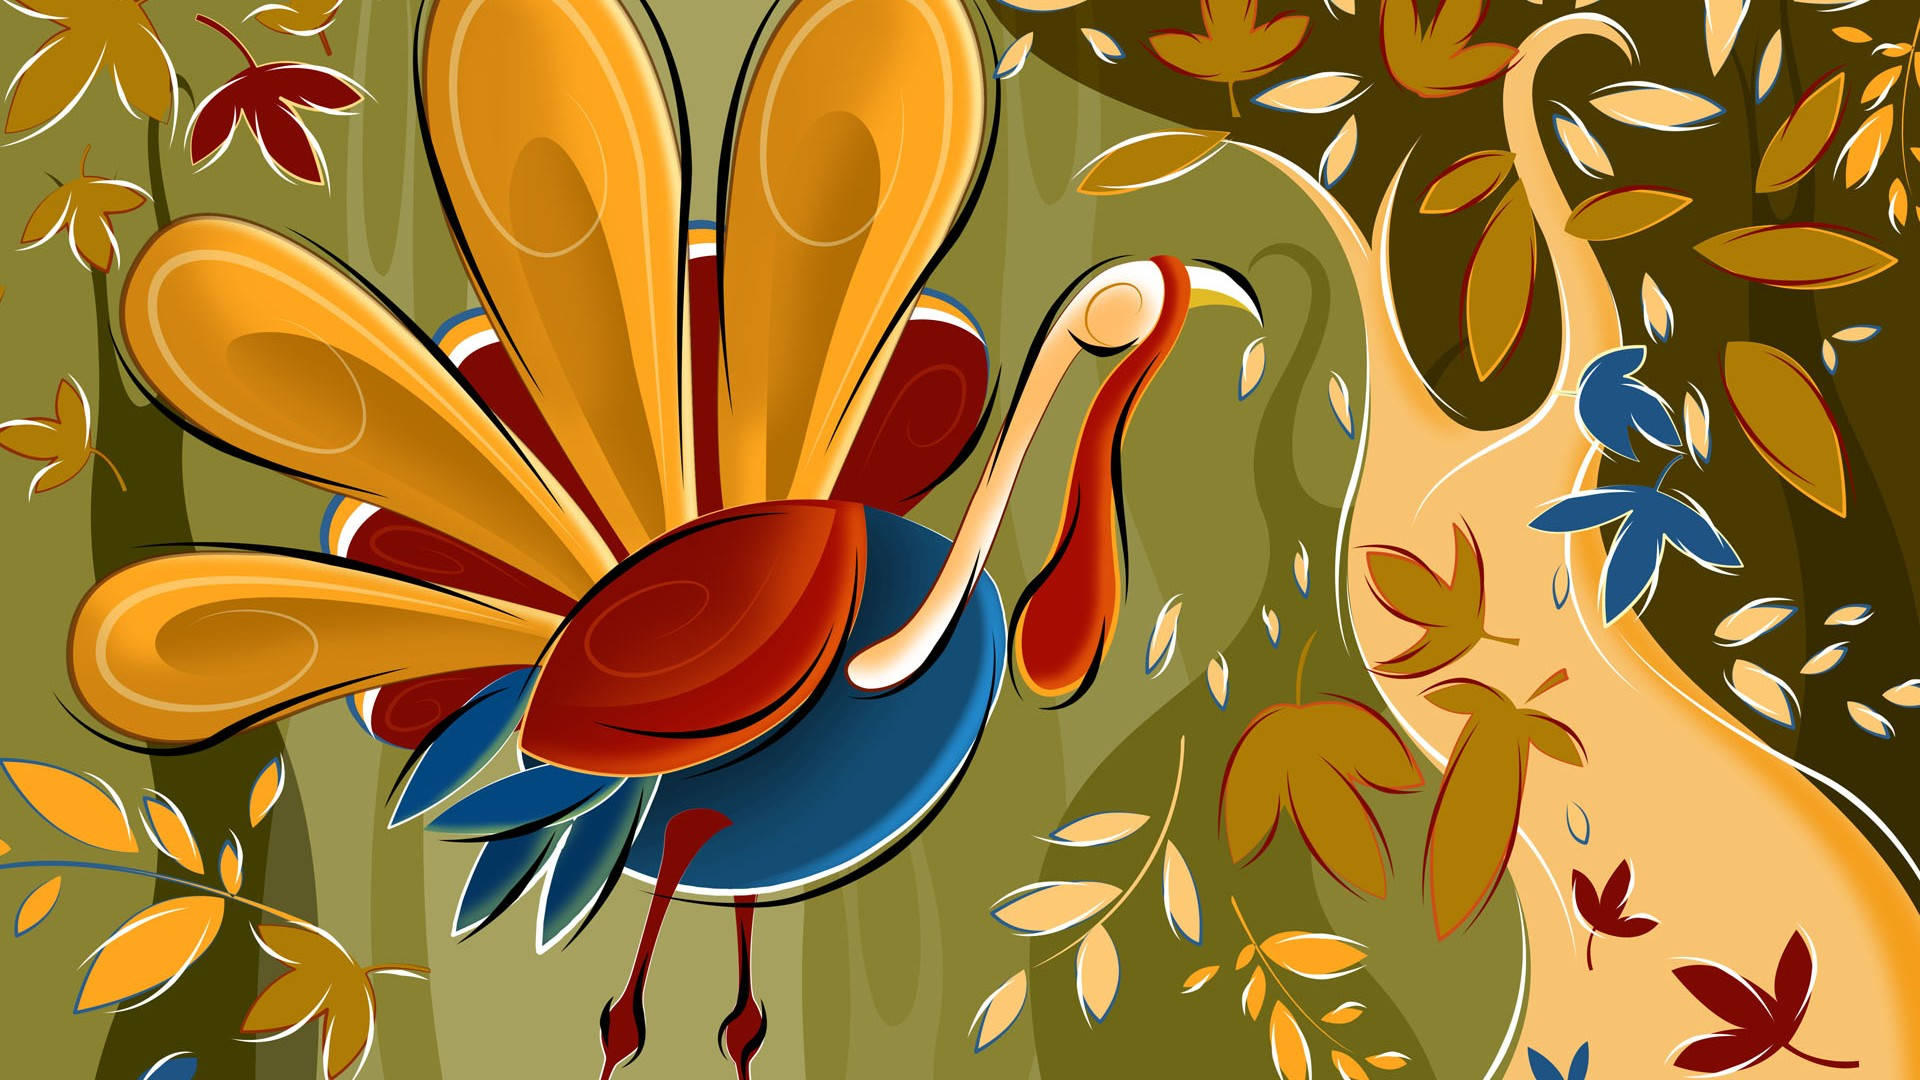 1920X1080 Thanksgiving Wallpaper and Background